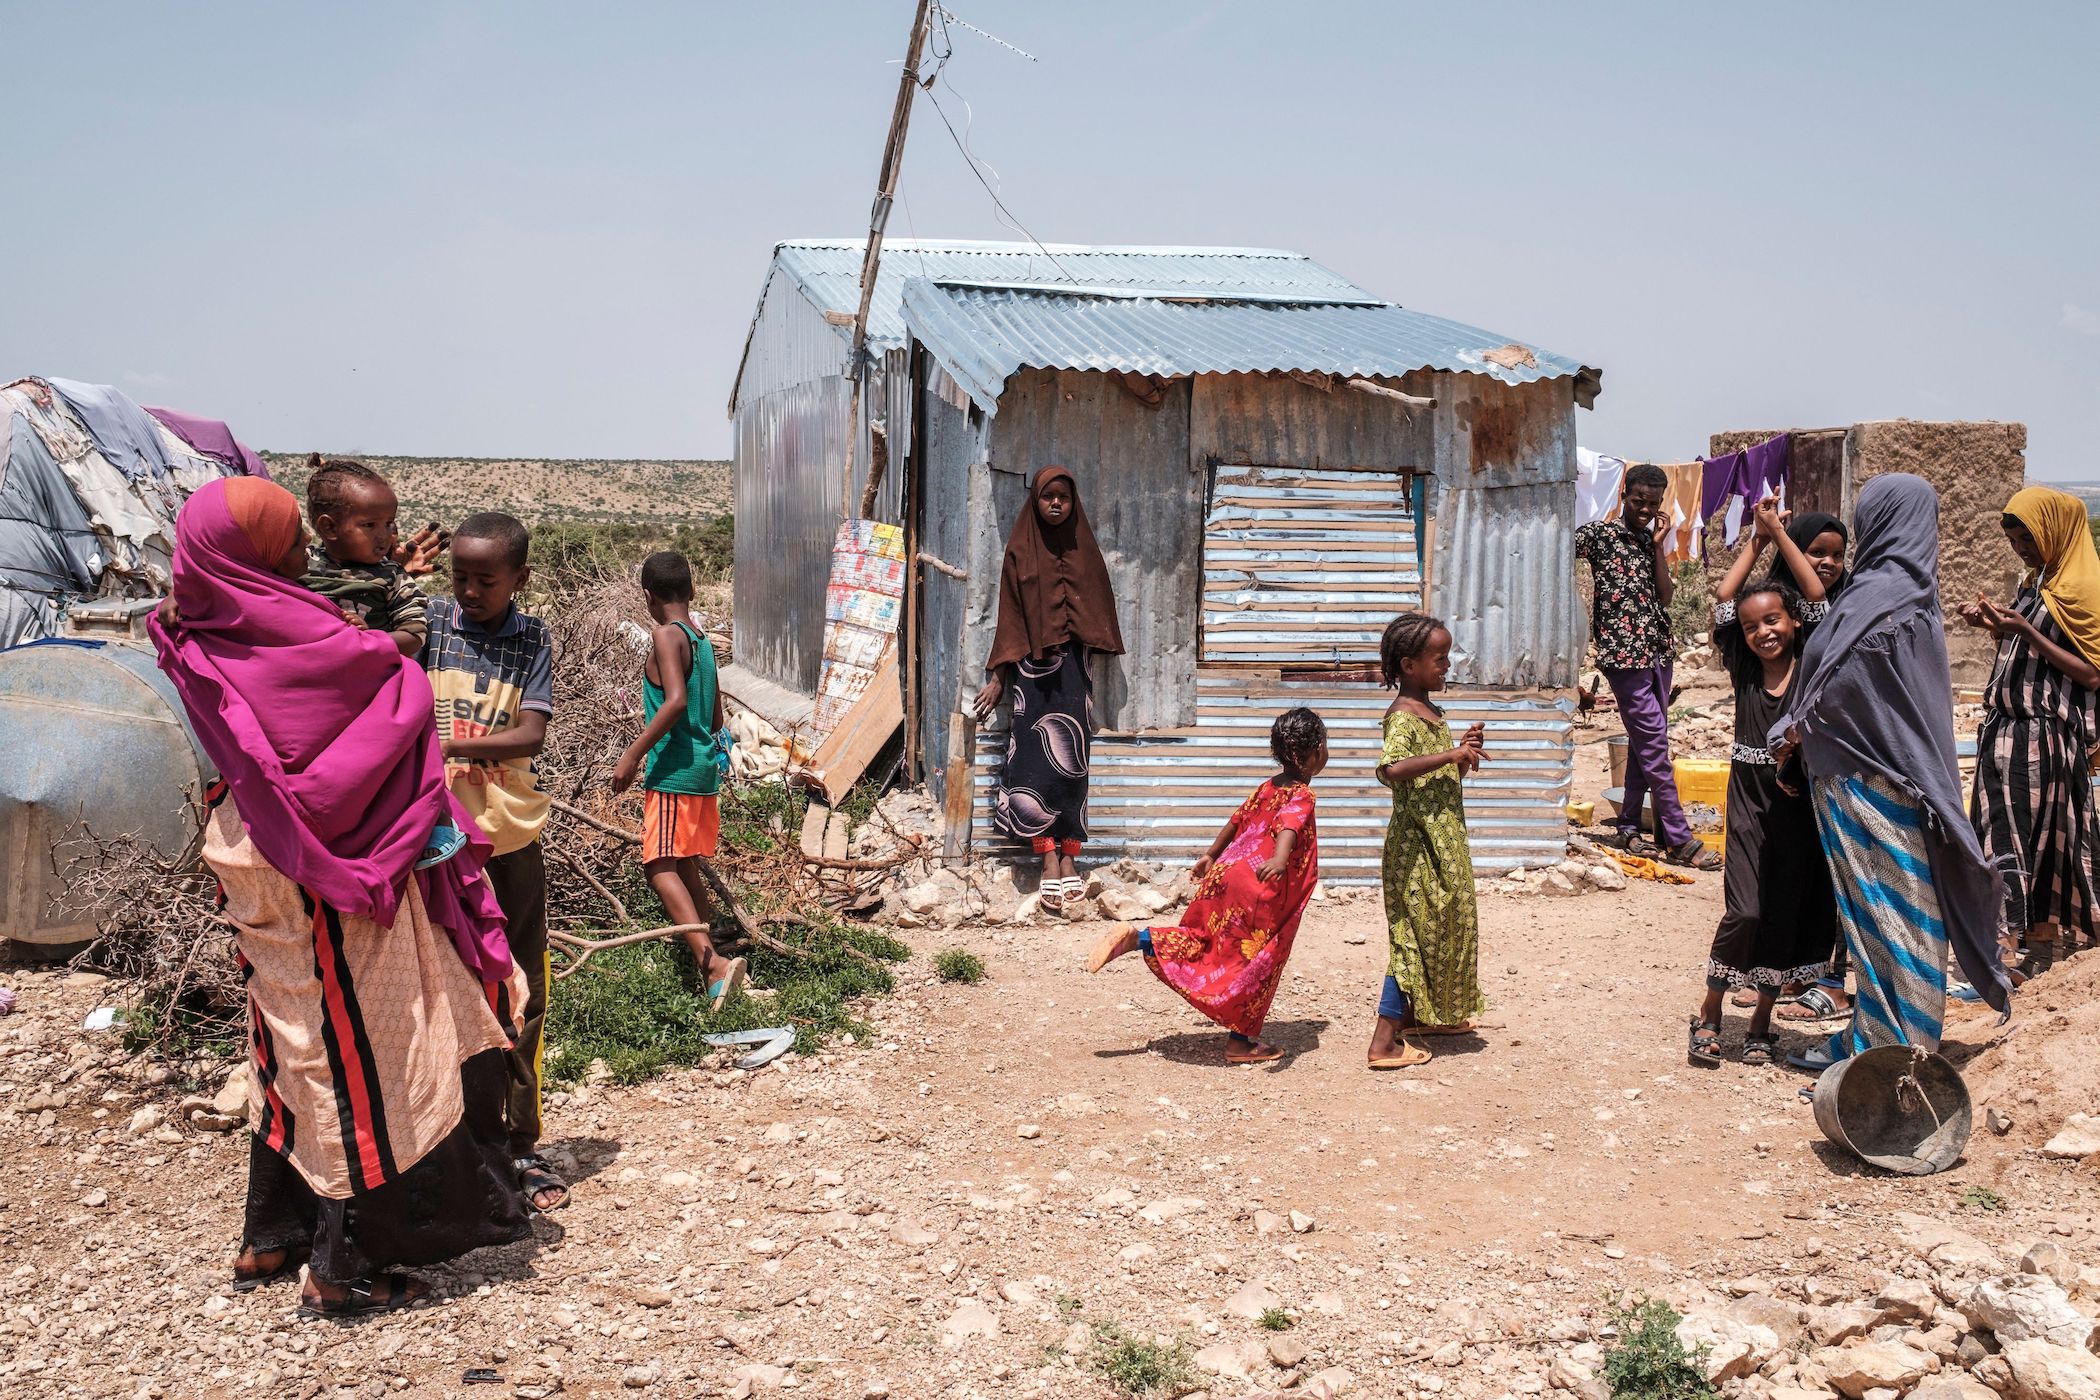 People stand outside of their homes in an informal settlement of internally displaced people in the outskirts of the city of Hargeisa, Somaliland, on September 16, 2021. (EDUARDO SOTERAS—AFP/Getty)